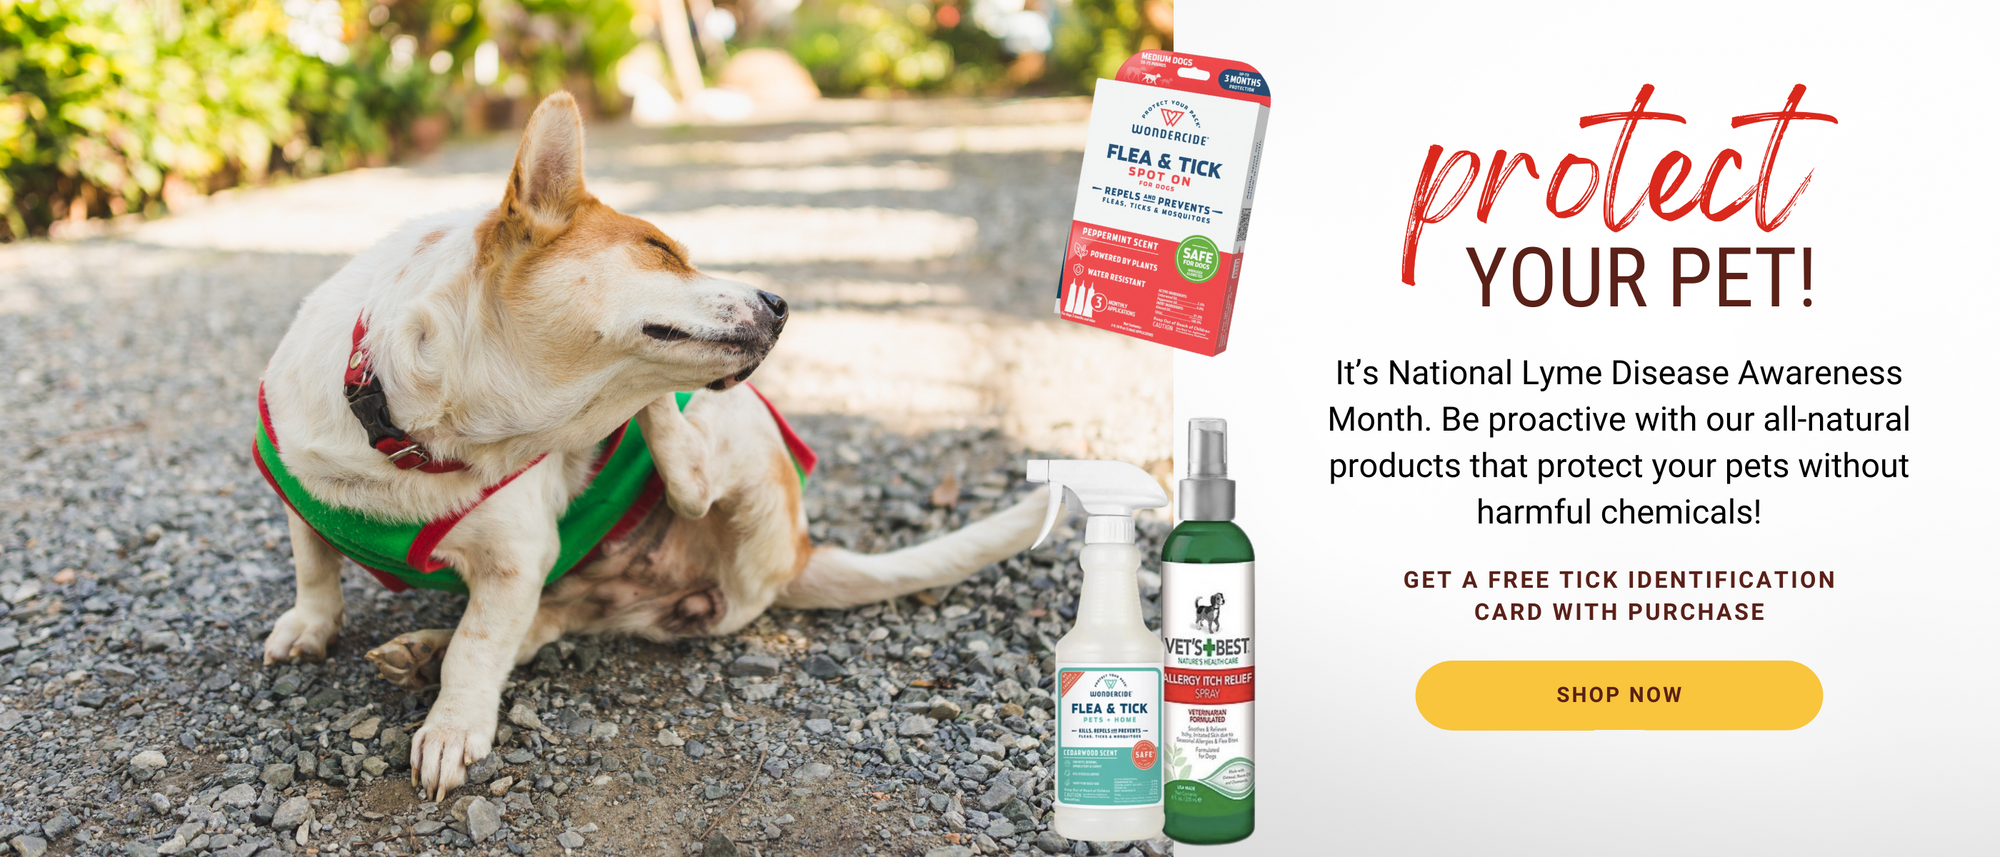 Protect your pet! It's National Lyme Disease Awareness Month. Be proactive with our all-natural products that protect your pets without harmful chemicals! Shop now! 